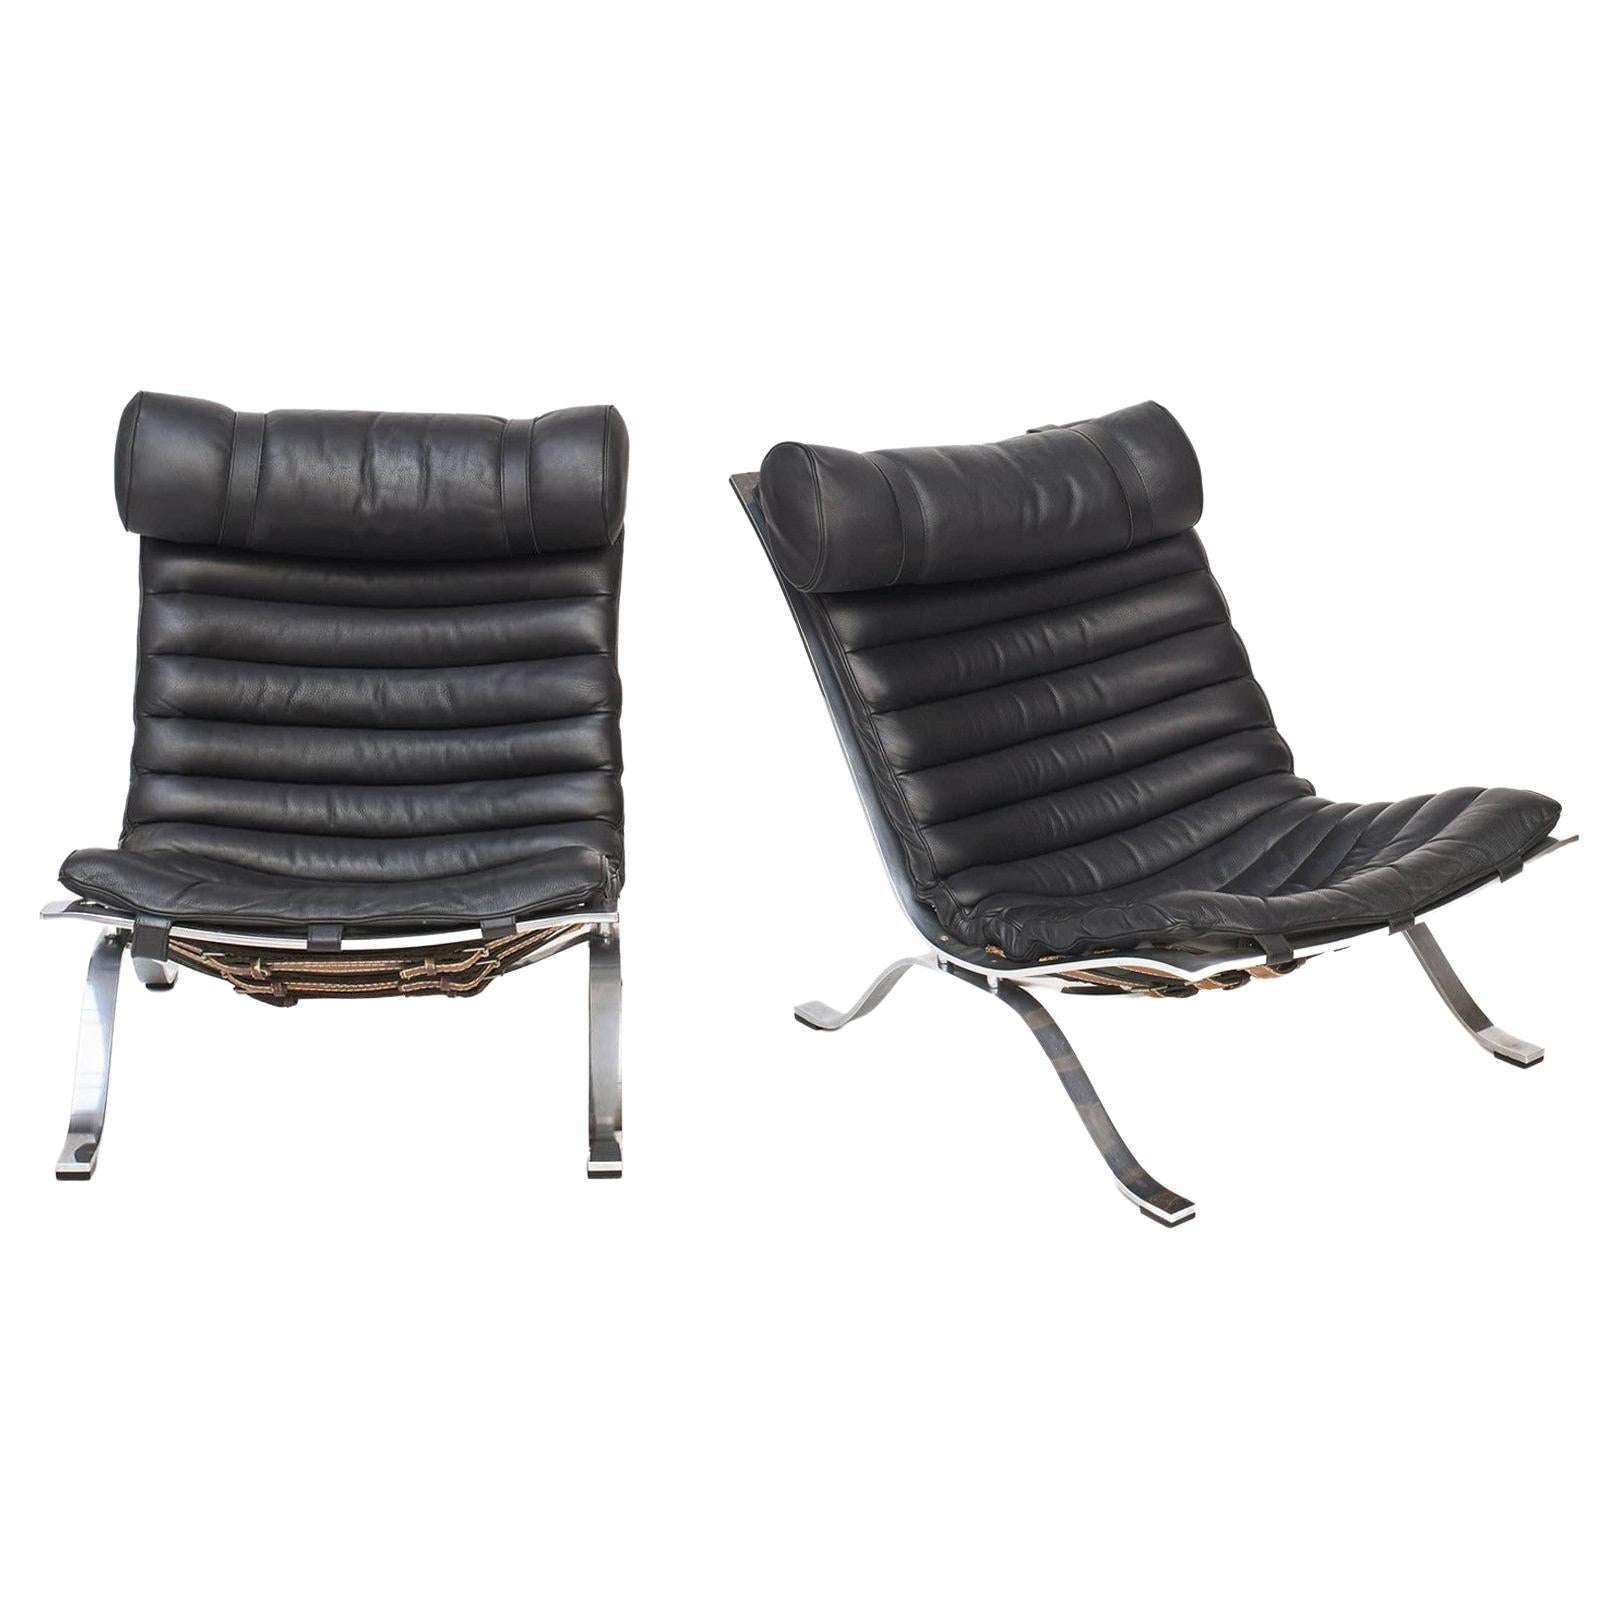 Arne Norell 1917-1971. (Price for a pair)
Pair of Ari easy chairs designed and produced by Arne Norell in Solna, Sweden.
Made in chromed steel and black leather upholstery.

Designed in 1966.
This pair is from the late 1960s.
The leather